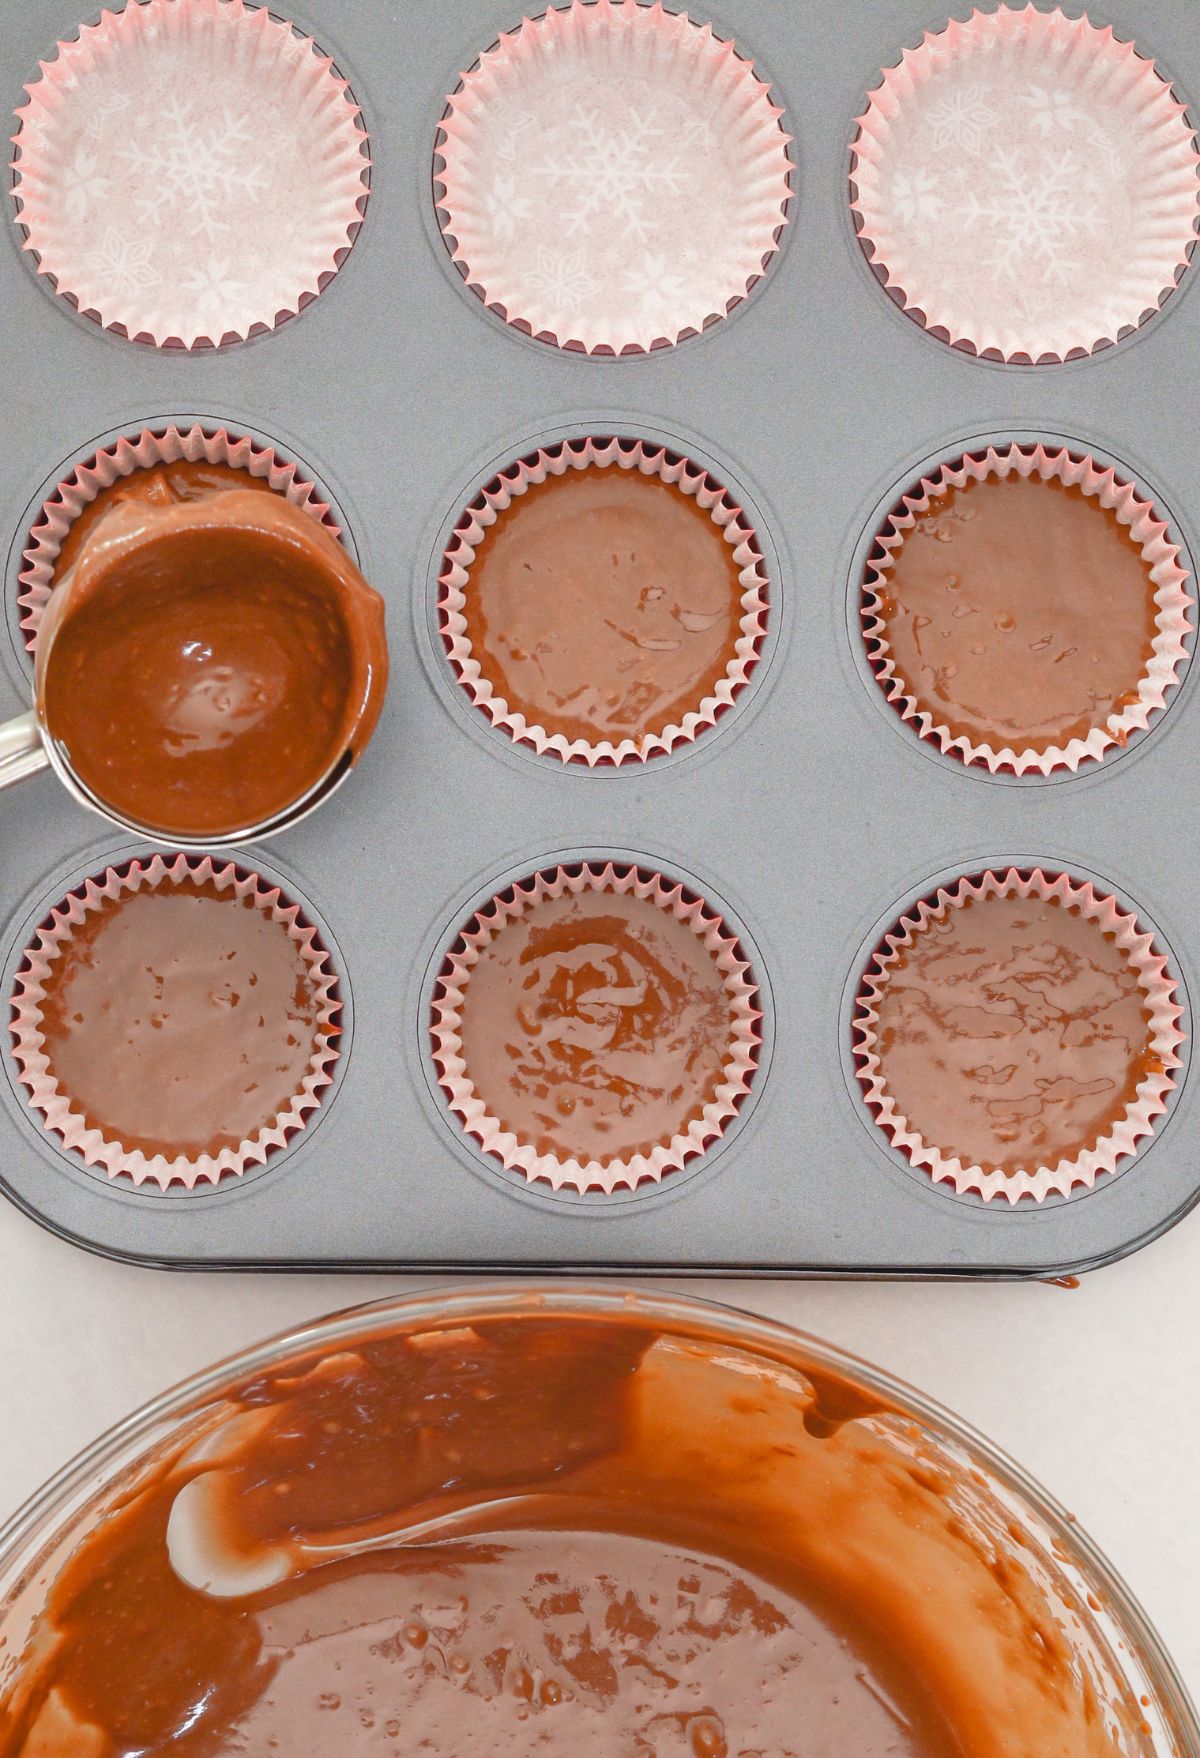 A cup of chocolate in a muffin tin.